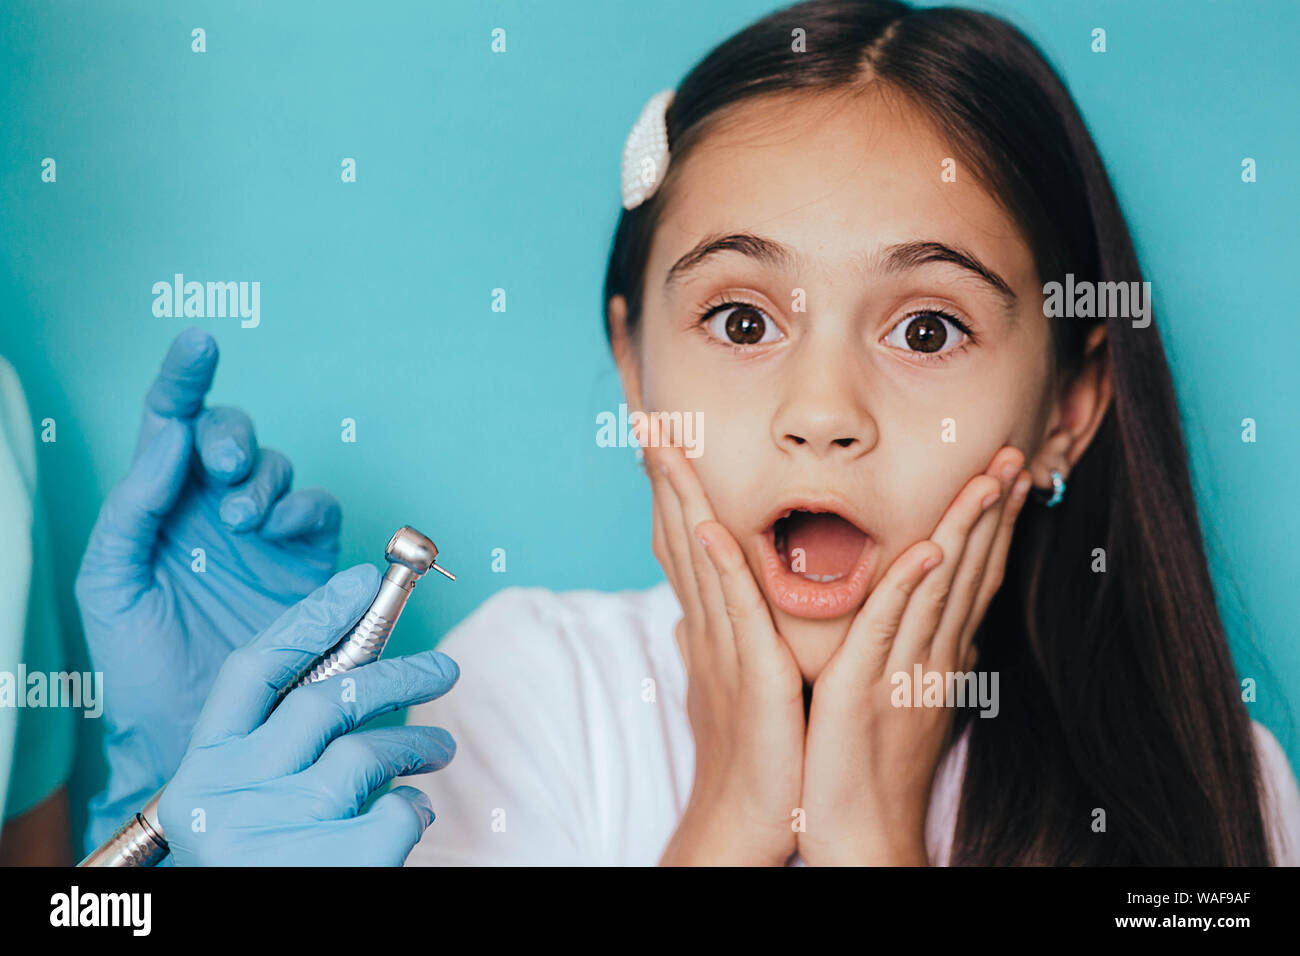 Child teeth treatment . little mixed race girl scared emotion with dental drill on blue background Stock Photo